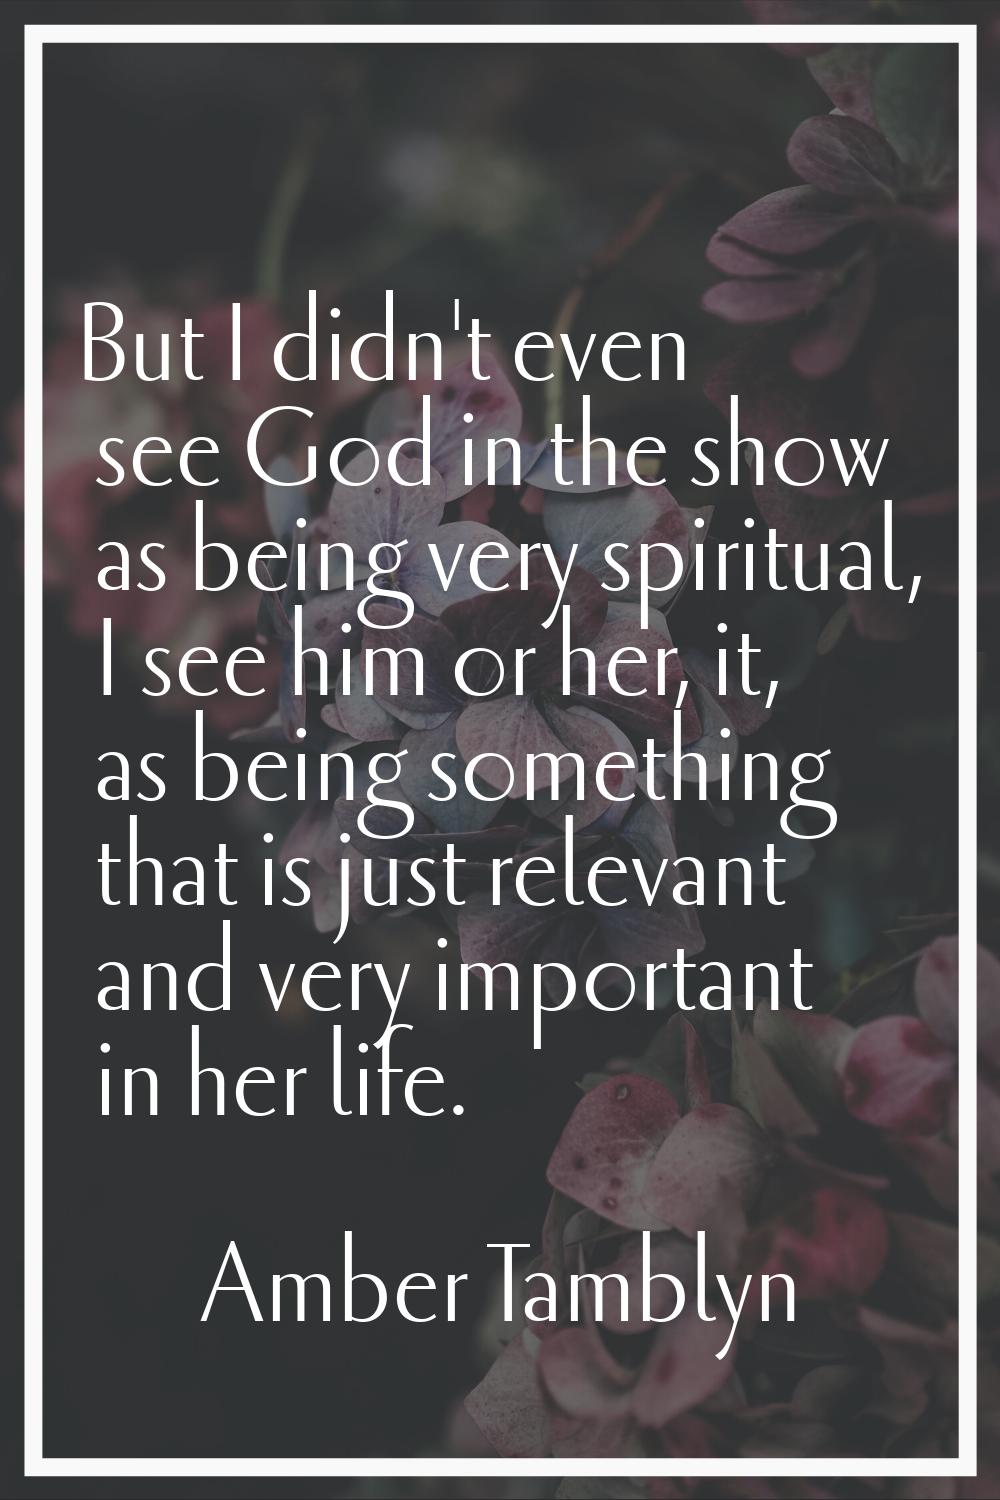 But I didn't even see God in the show as being very spiritual, I see him or her, it, as being somet